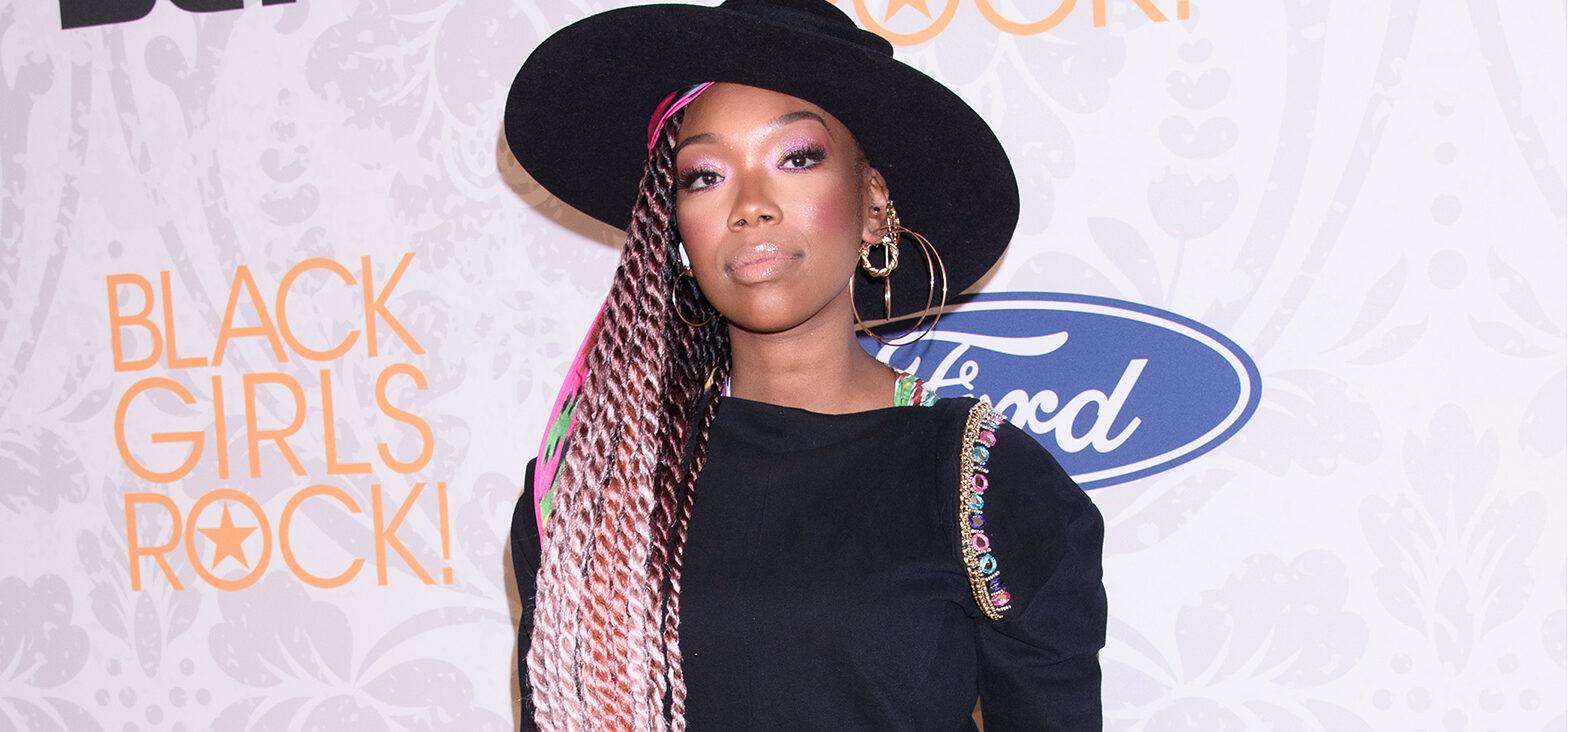 Singer Brandy Accused Of 'Age Discrimination' After Firing 60-Year-Old Housekeeper